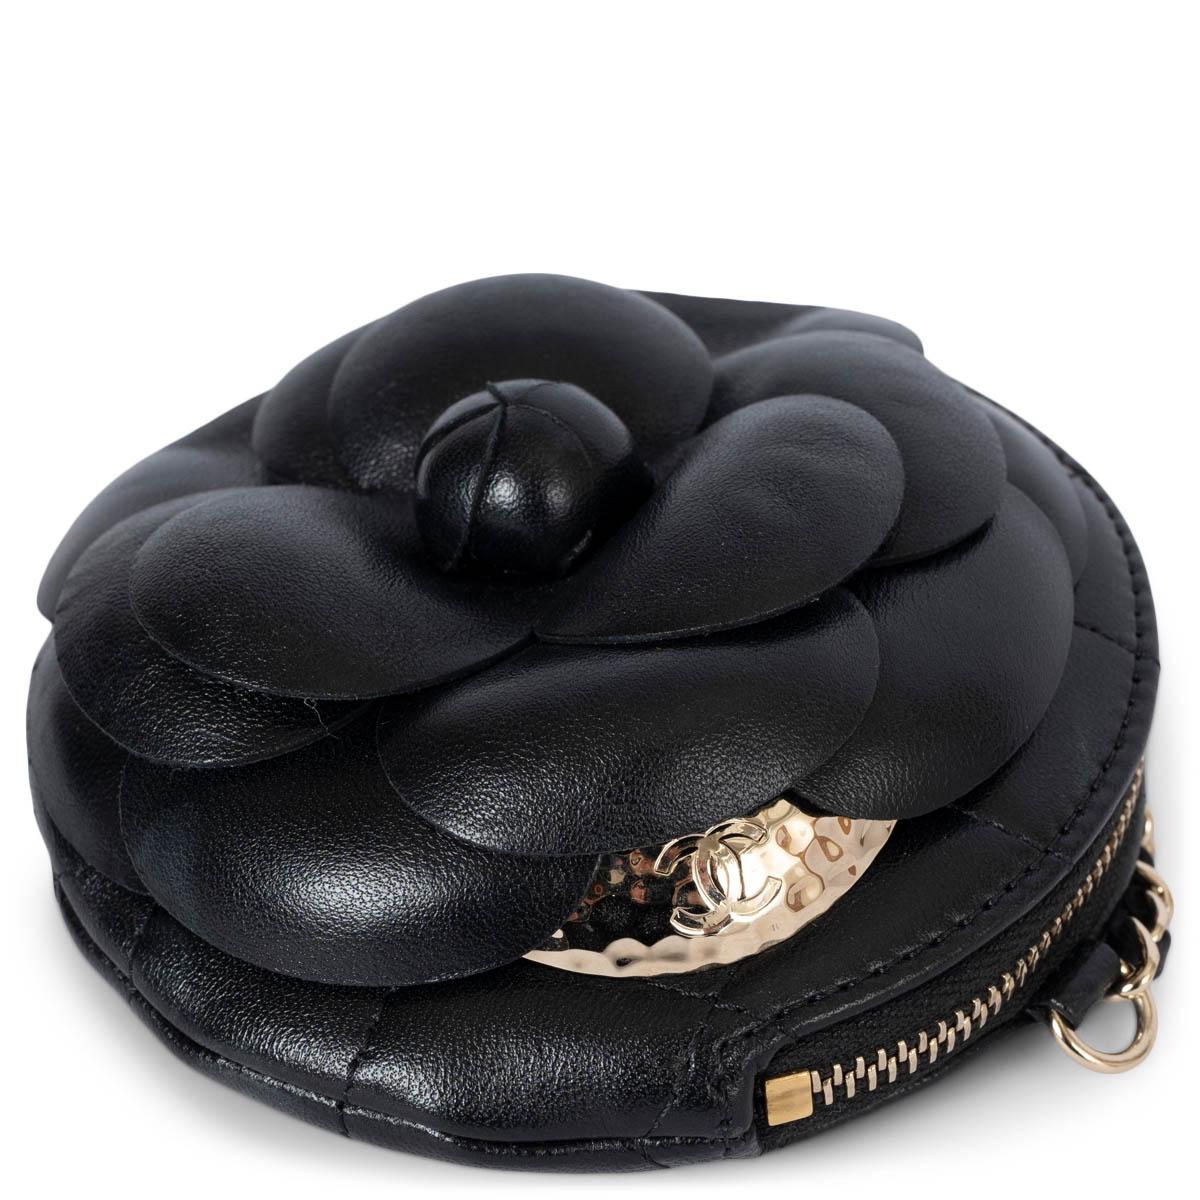 100% authentic Chanel Camellia round clutch with chain in black shiny calfskin leather. Features gold-tone hardware, a chain strap and CC button on the front. Opens with a zipper with CC chain pull and is lined in grosgrain fabric. This stunning